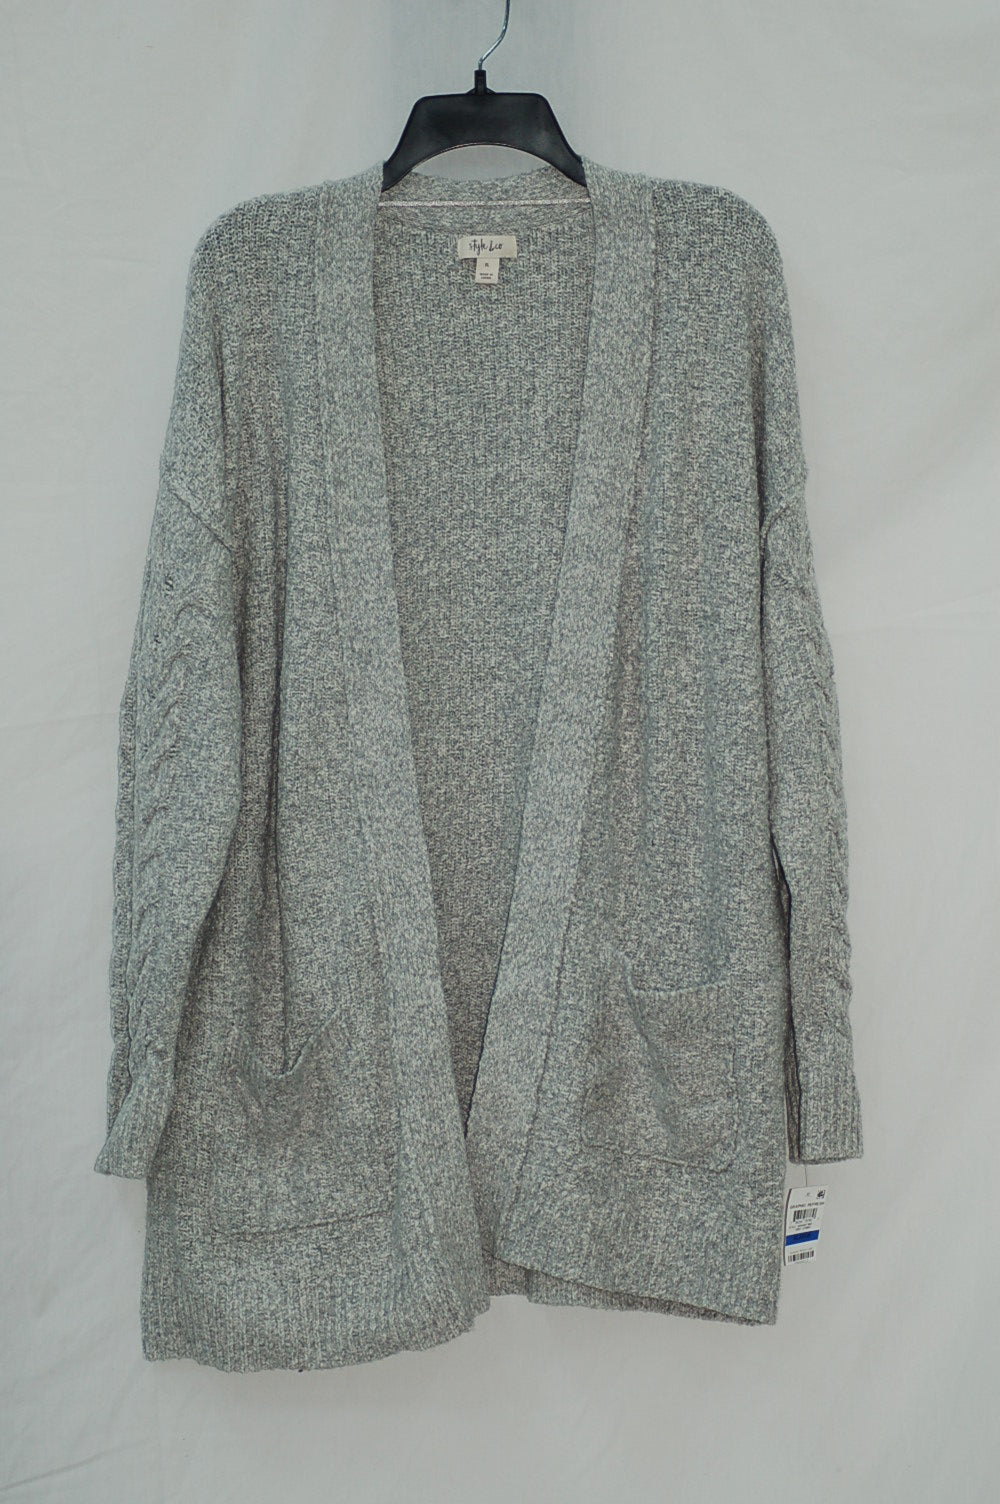 Style & Co Sweater Braidsleeve Marl Openfront Cardigan Gray LARGE